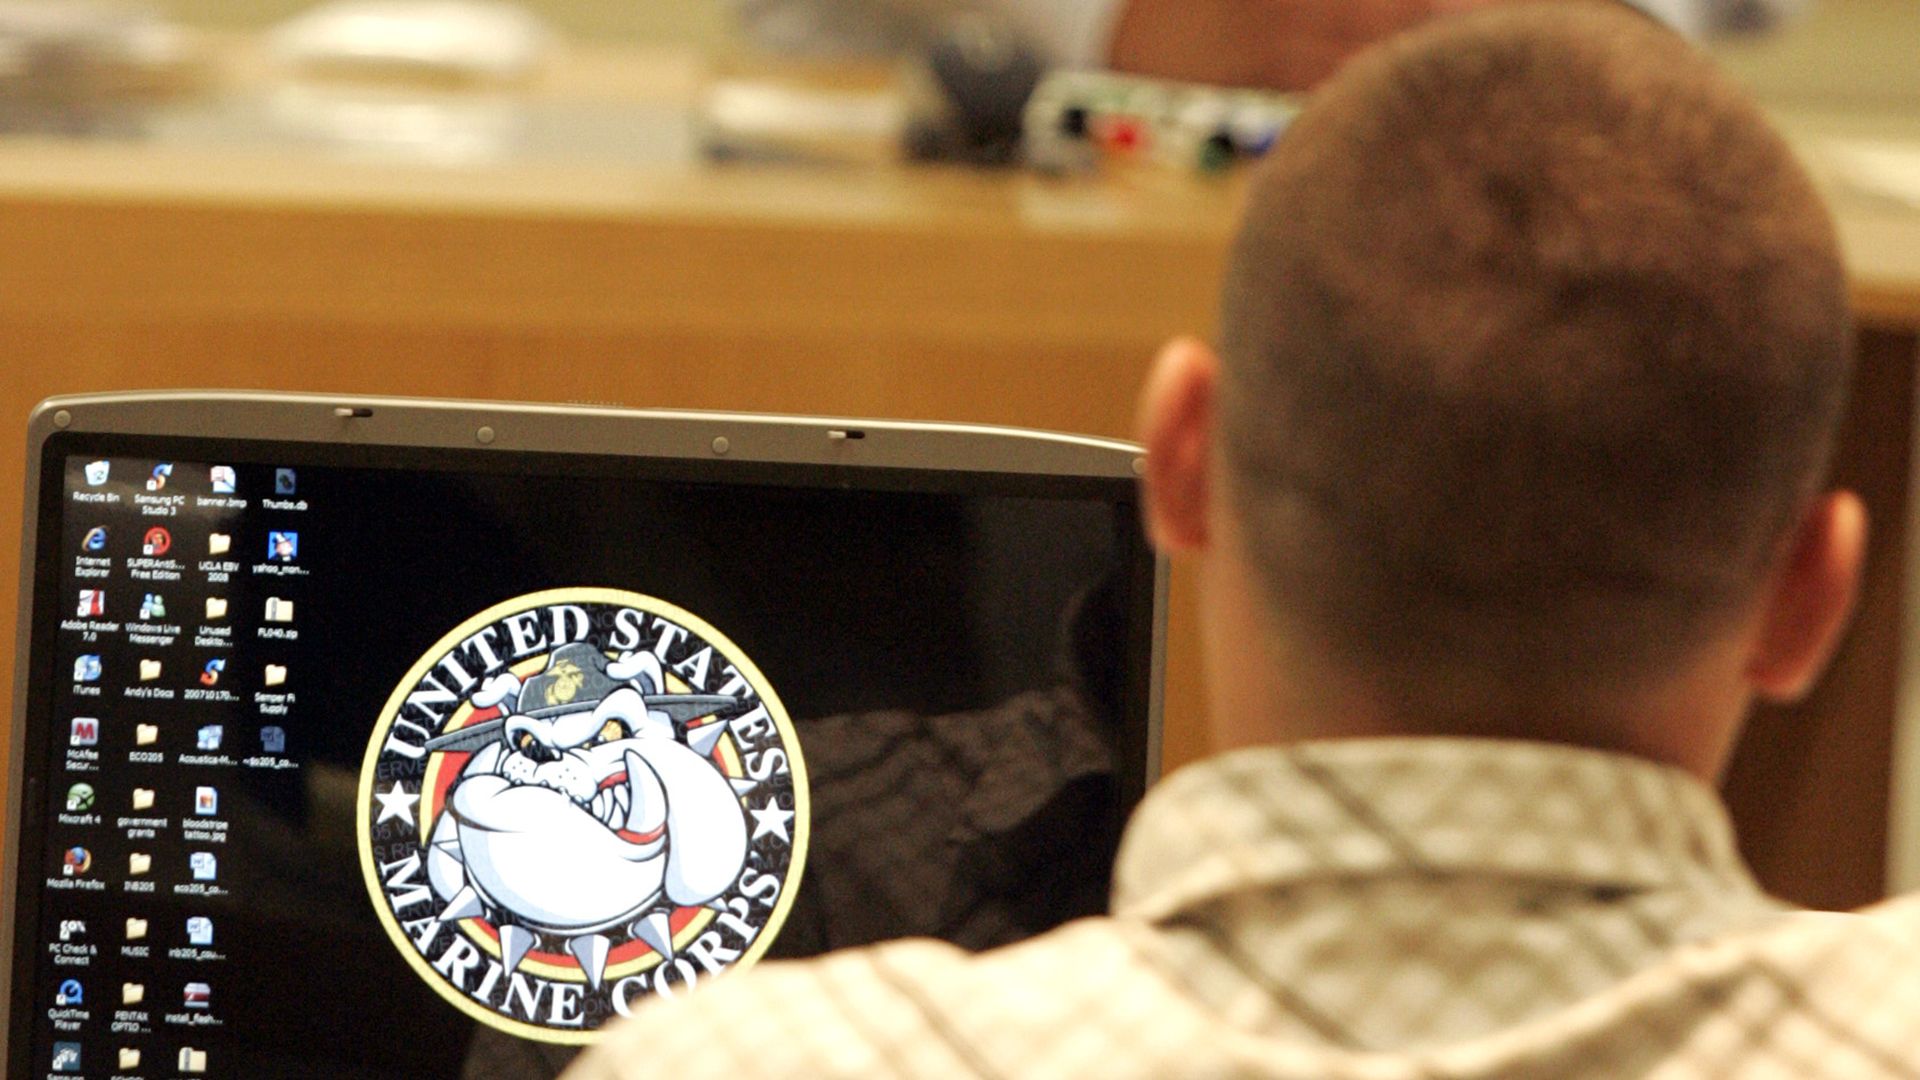 A man sits at a laptop displaying the US Marine Corps logo.